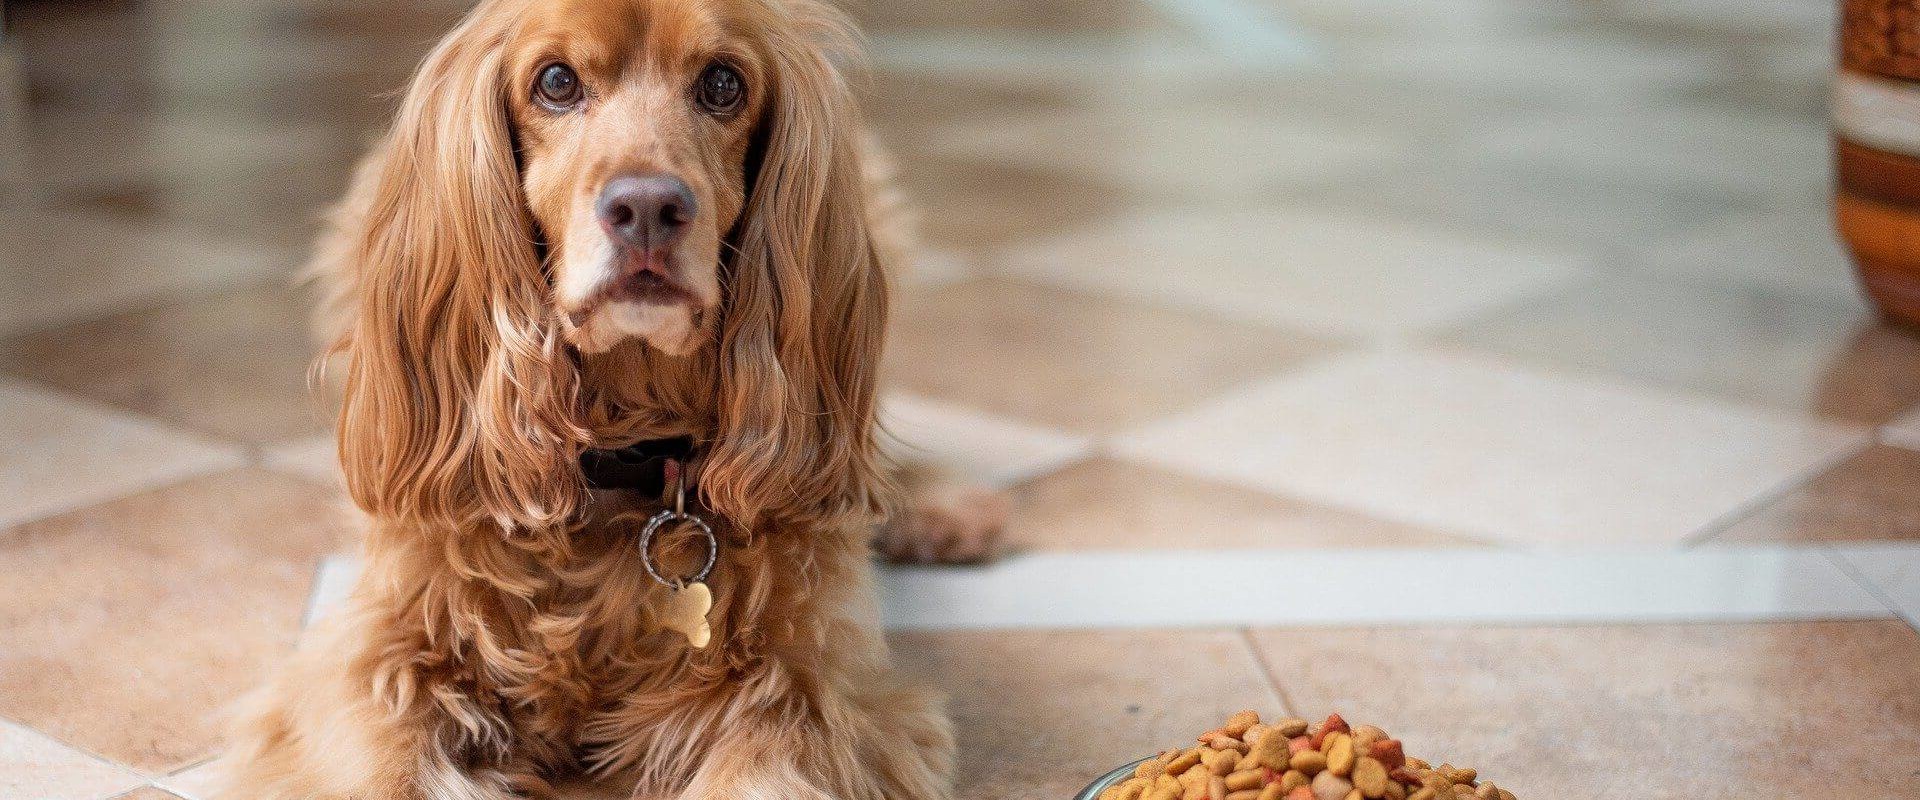 What brand of dog food is killing dogs?